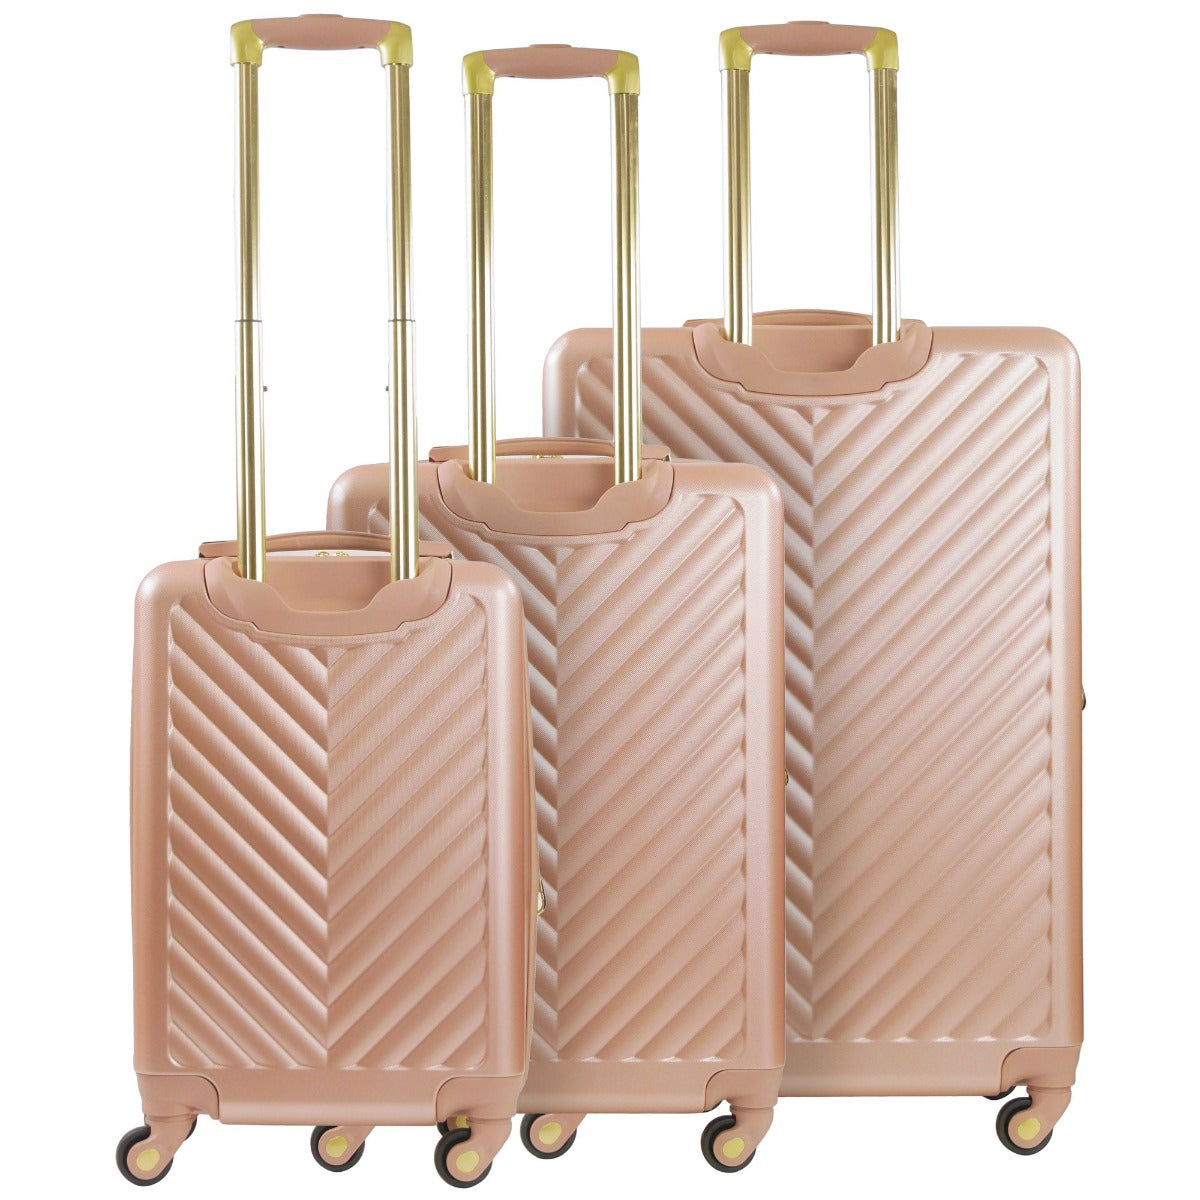 Christian Siriano New York Addie rose gold 3 piece luggage set - best suitcase set for travelling